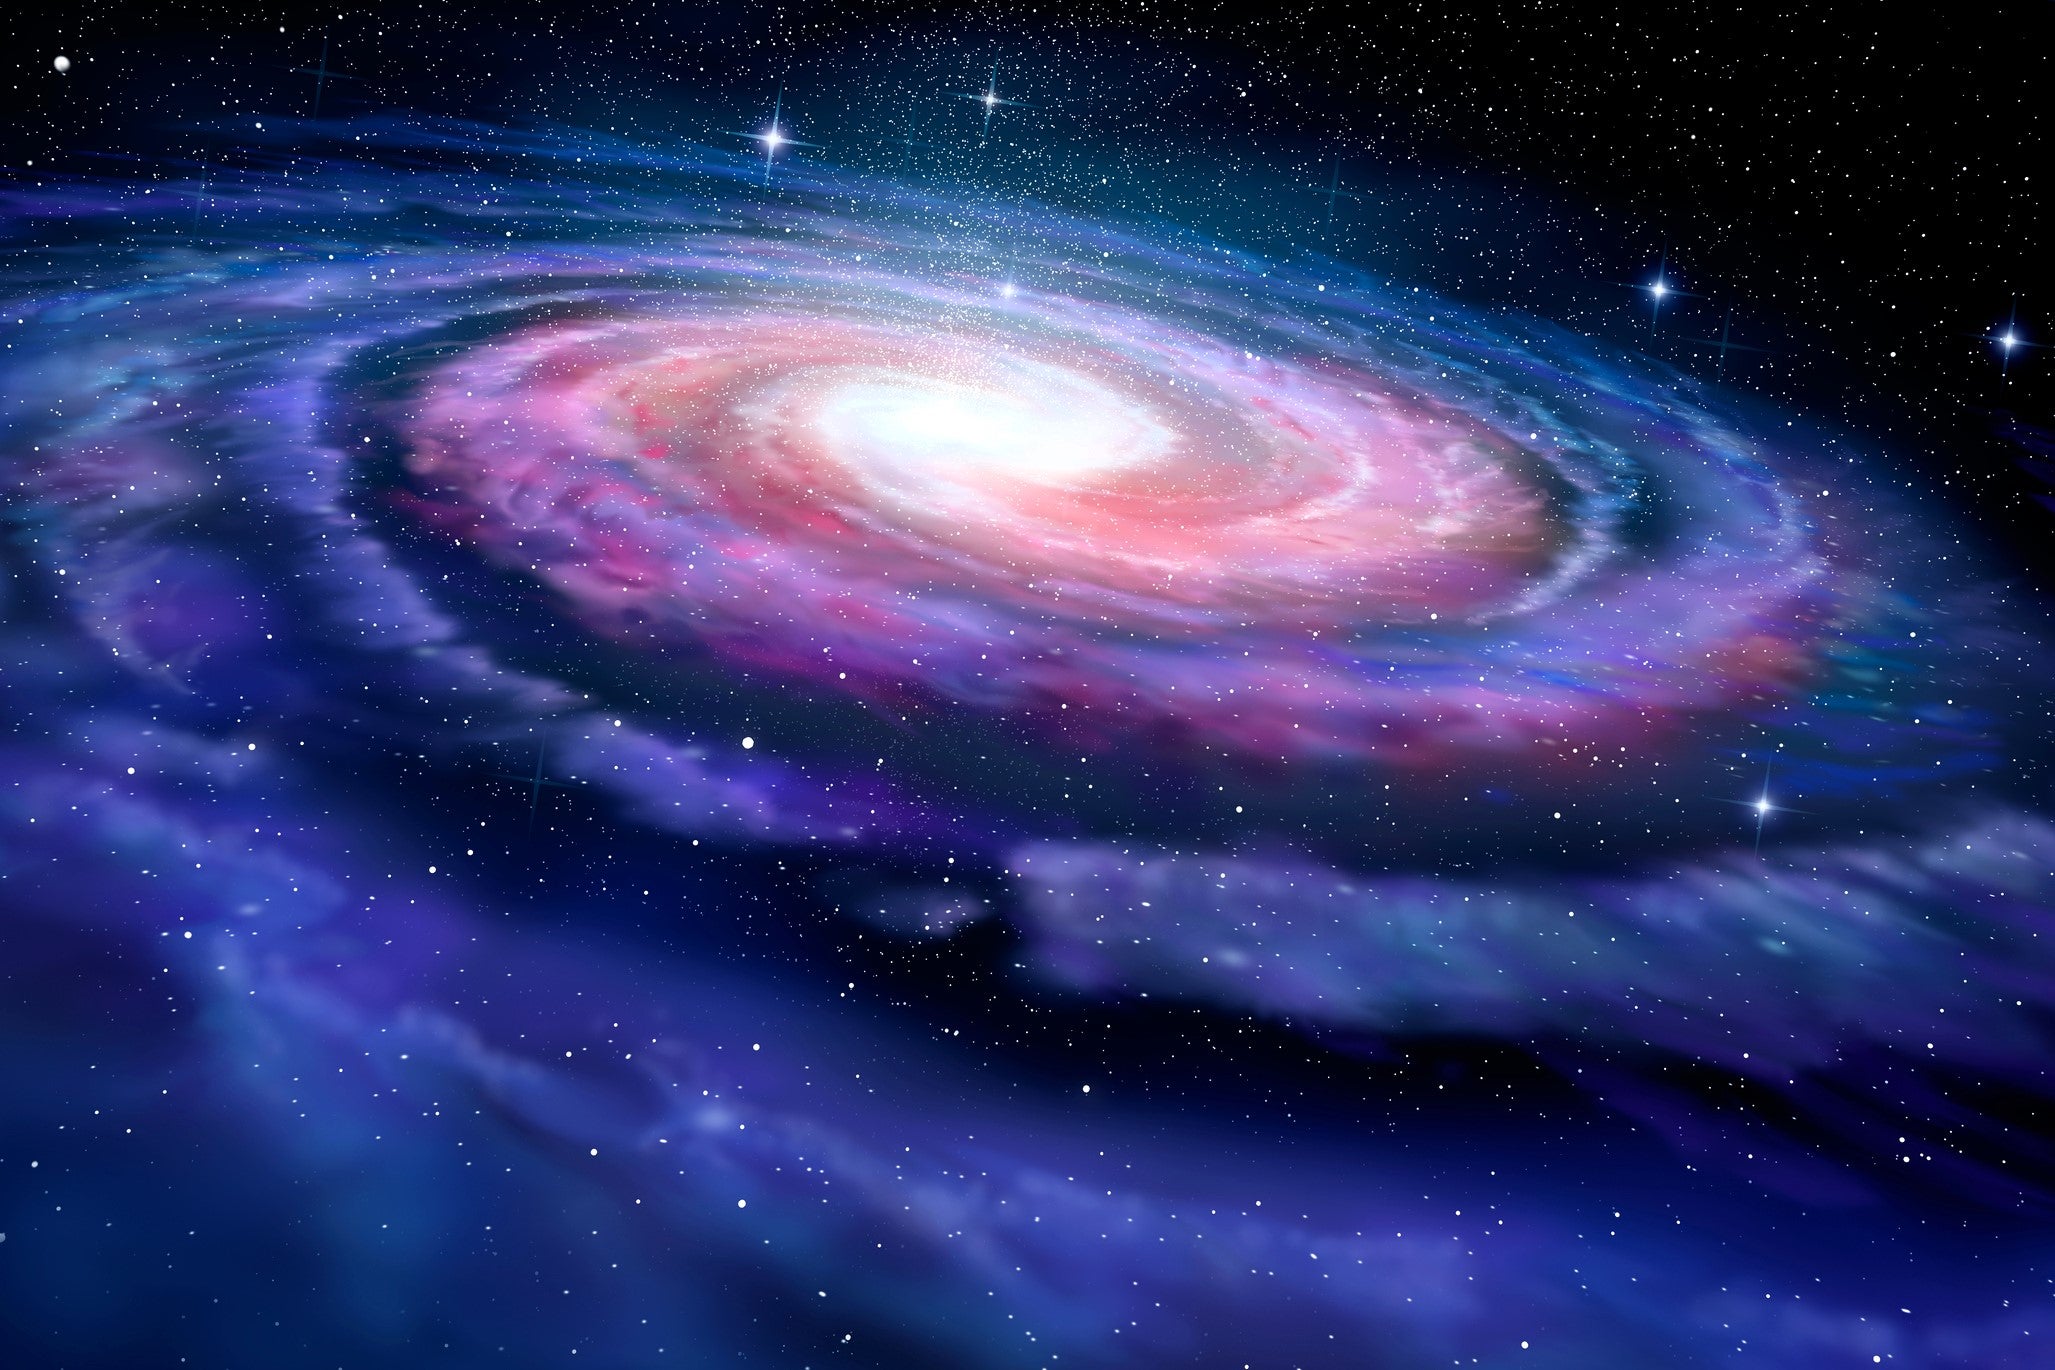 Scientists from the University of Arizona discovered phosphorus on the edge of the Milky Way galaxy